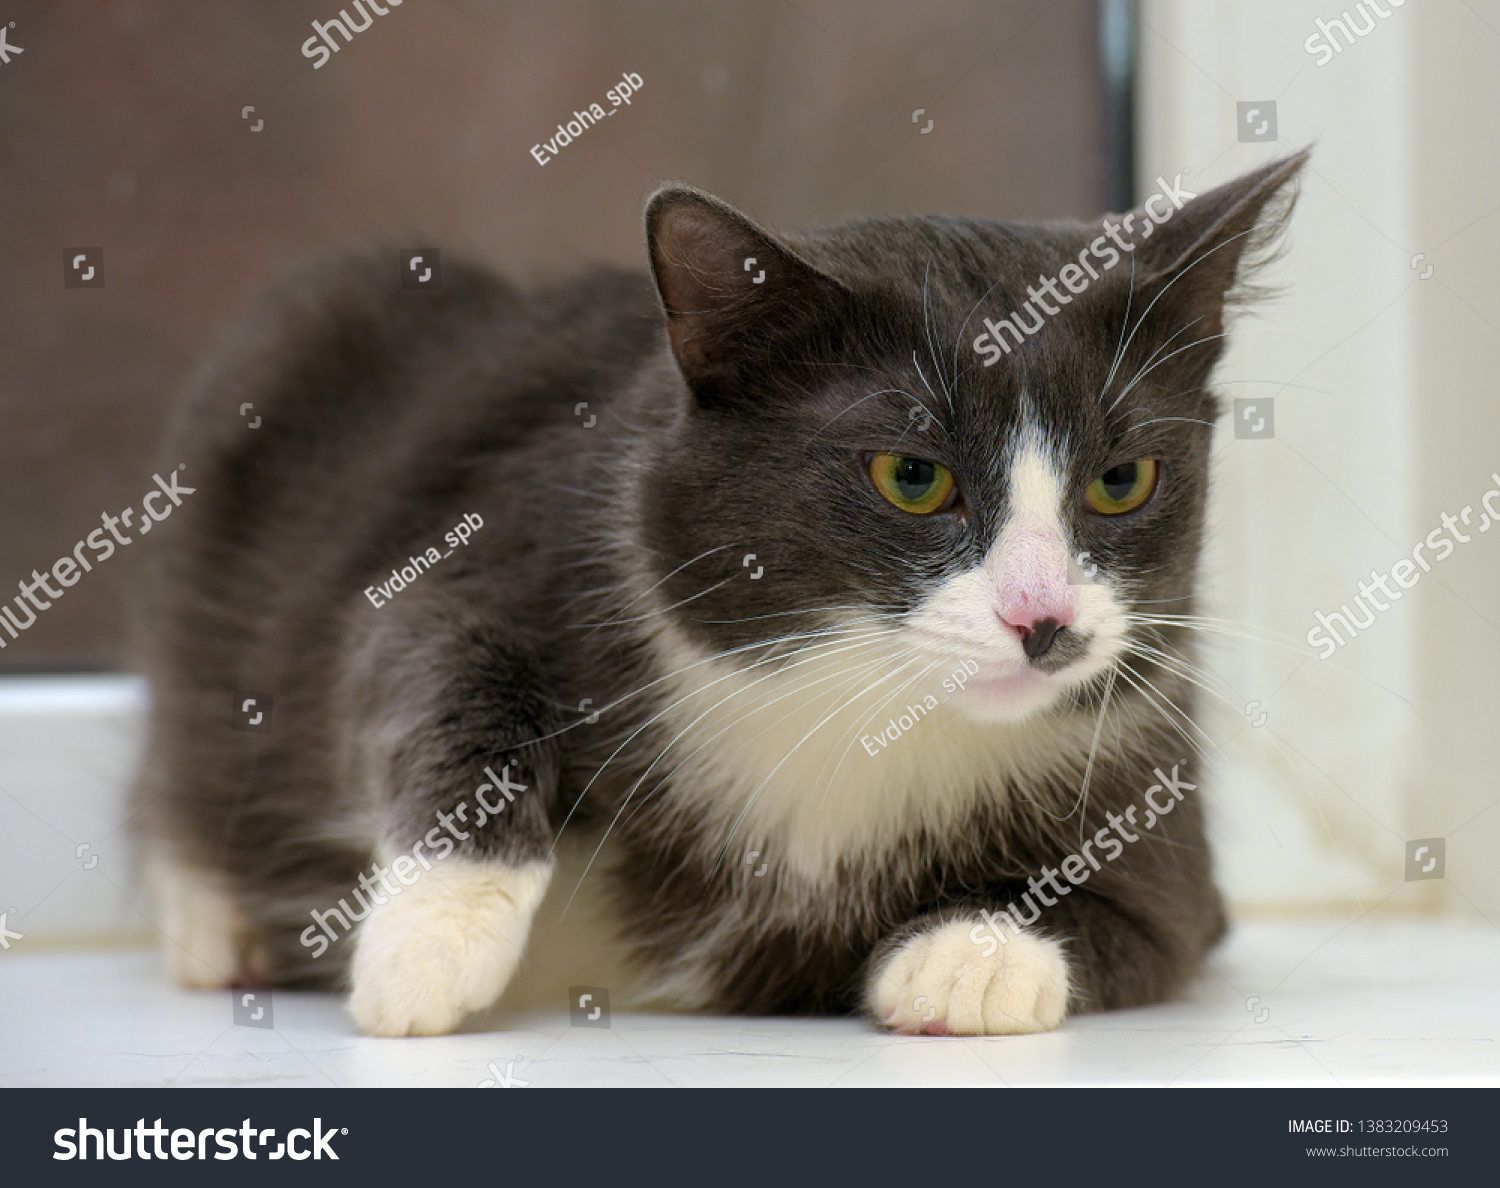 gray with white plump cat portrait #1383209453